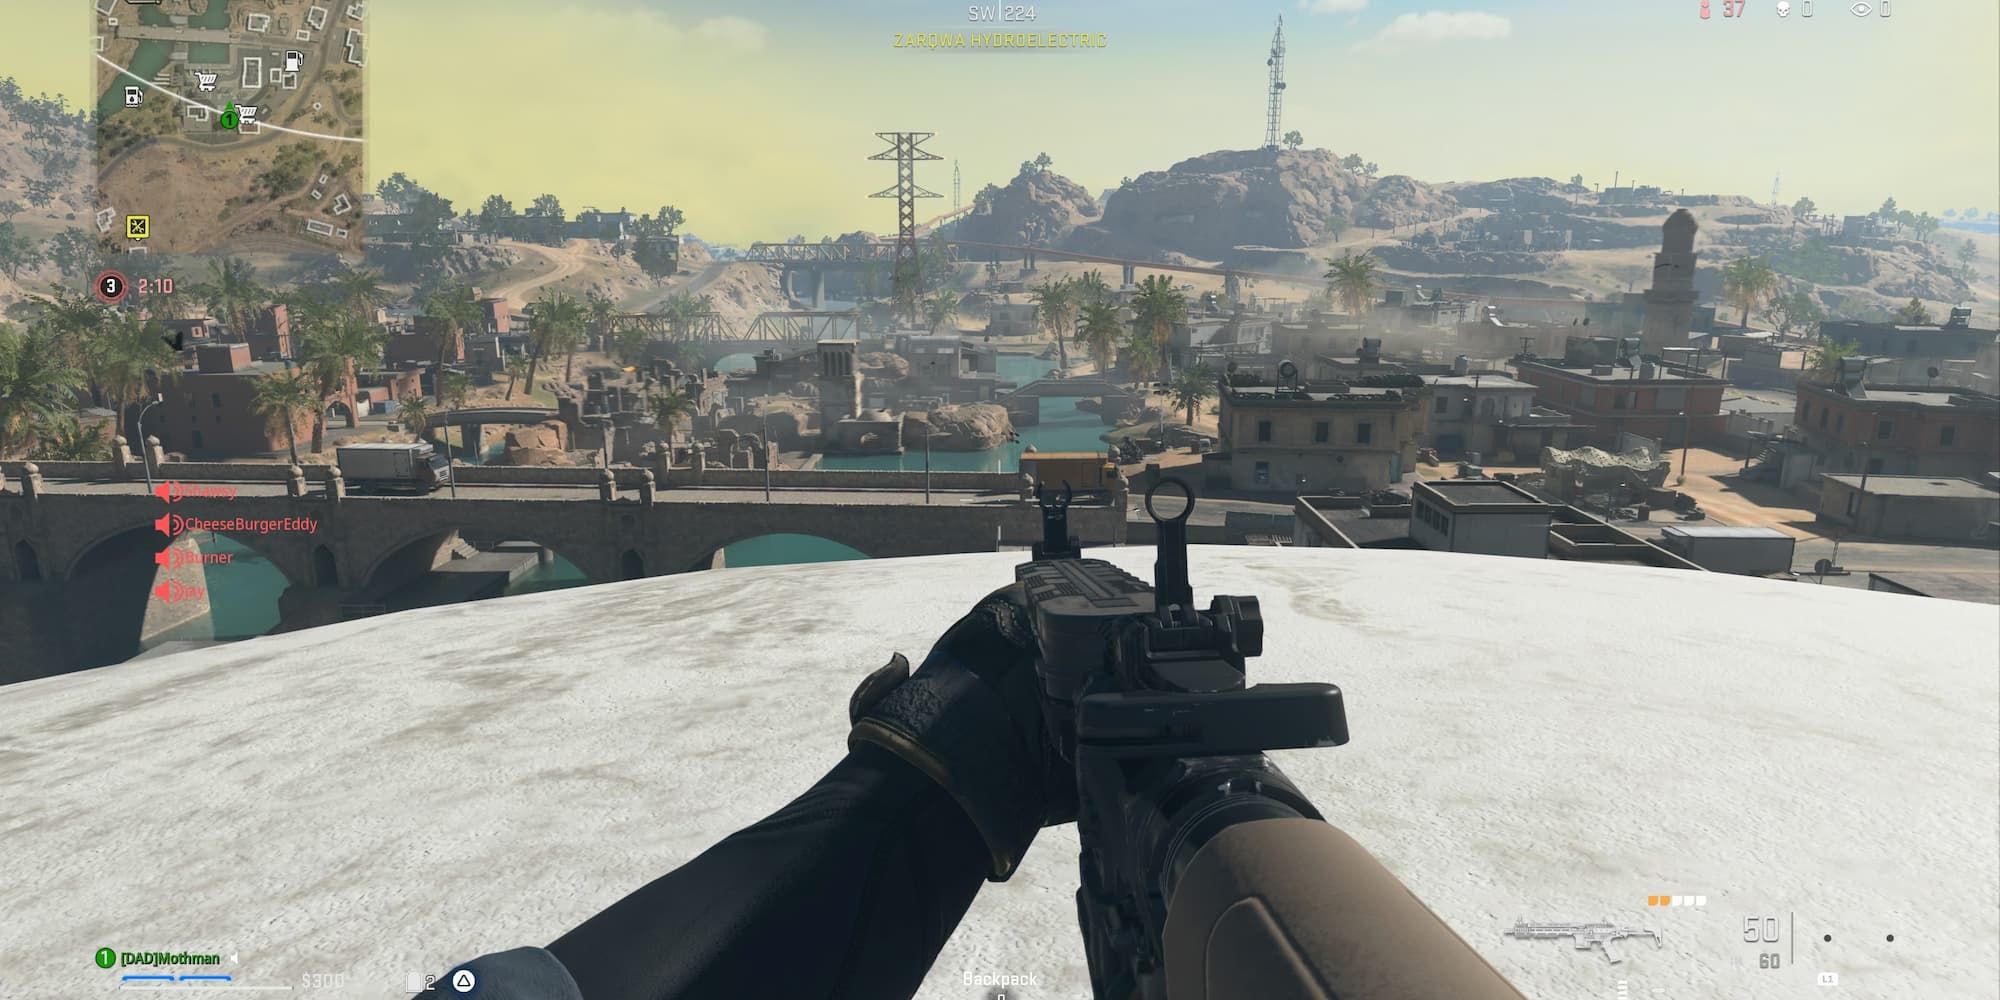 The player and his assault rifle look at the bridge of Zarqwa Hydroelectric from the top of the water tower.